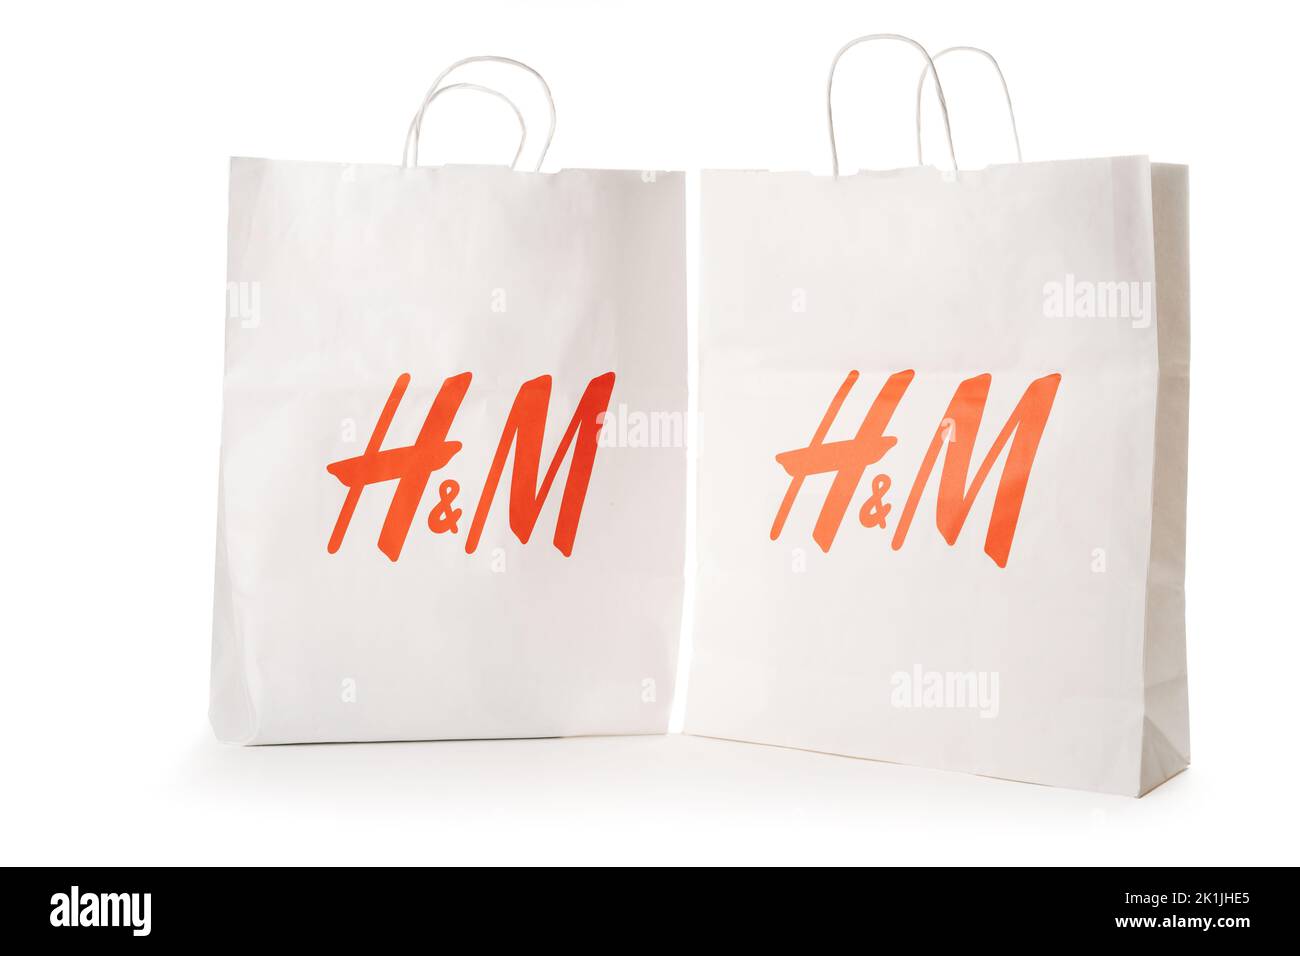 Cyprus, Paphos - SEPTEMBER 08, 2022: Two HM paper bag from famous swedish fast-fashion clothing brand. Over white background. Stock Photo